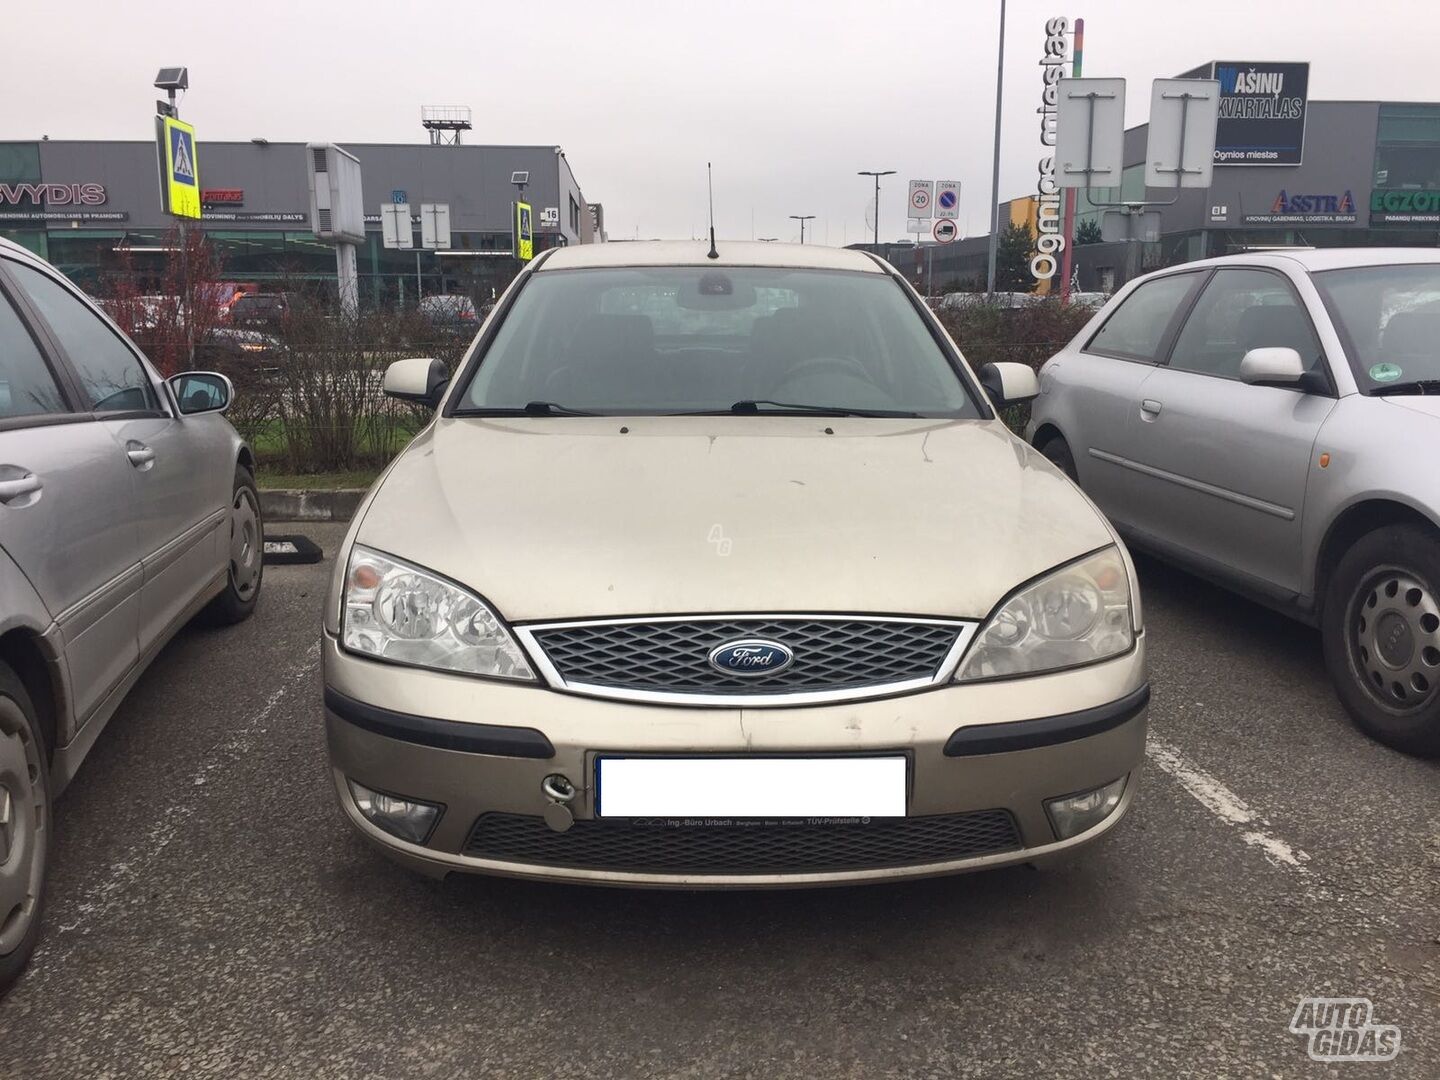 Ford Mondeo 2005 m dalys